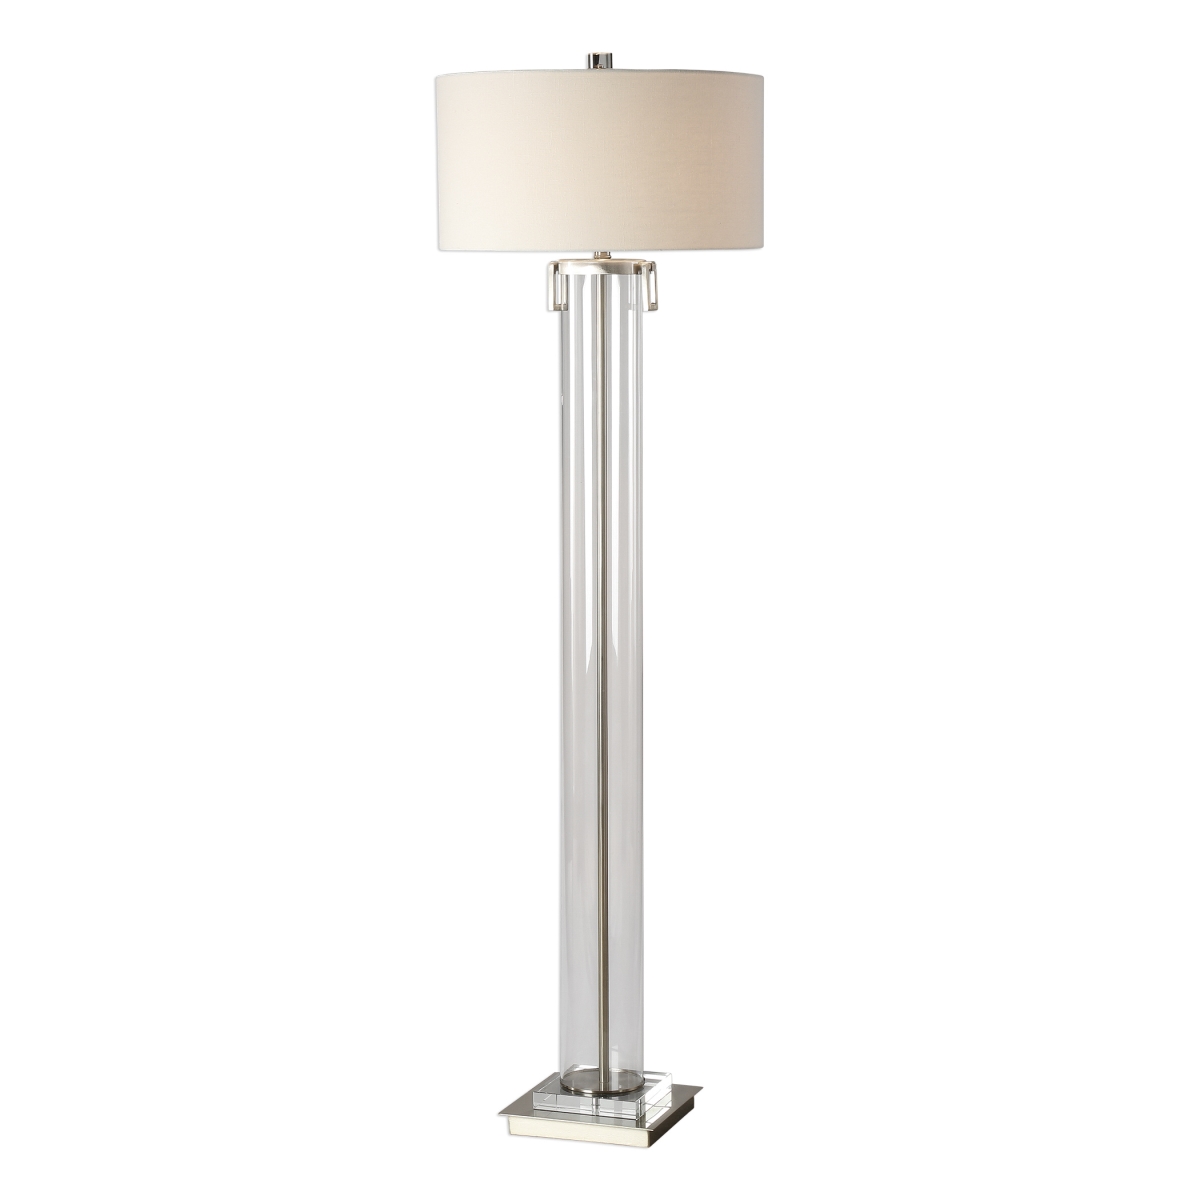 Picture of 212 Main 28160 Monette Tall Cylinder Floor Lamp